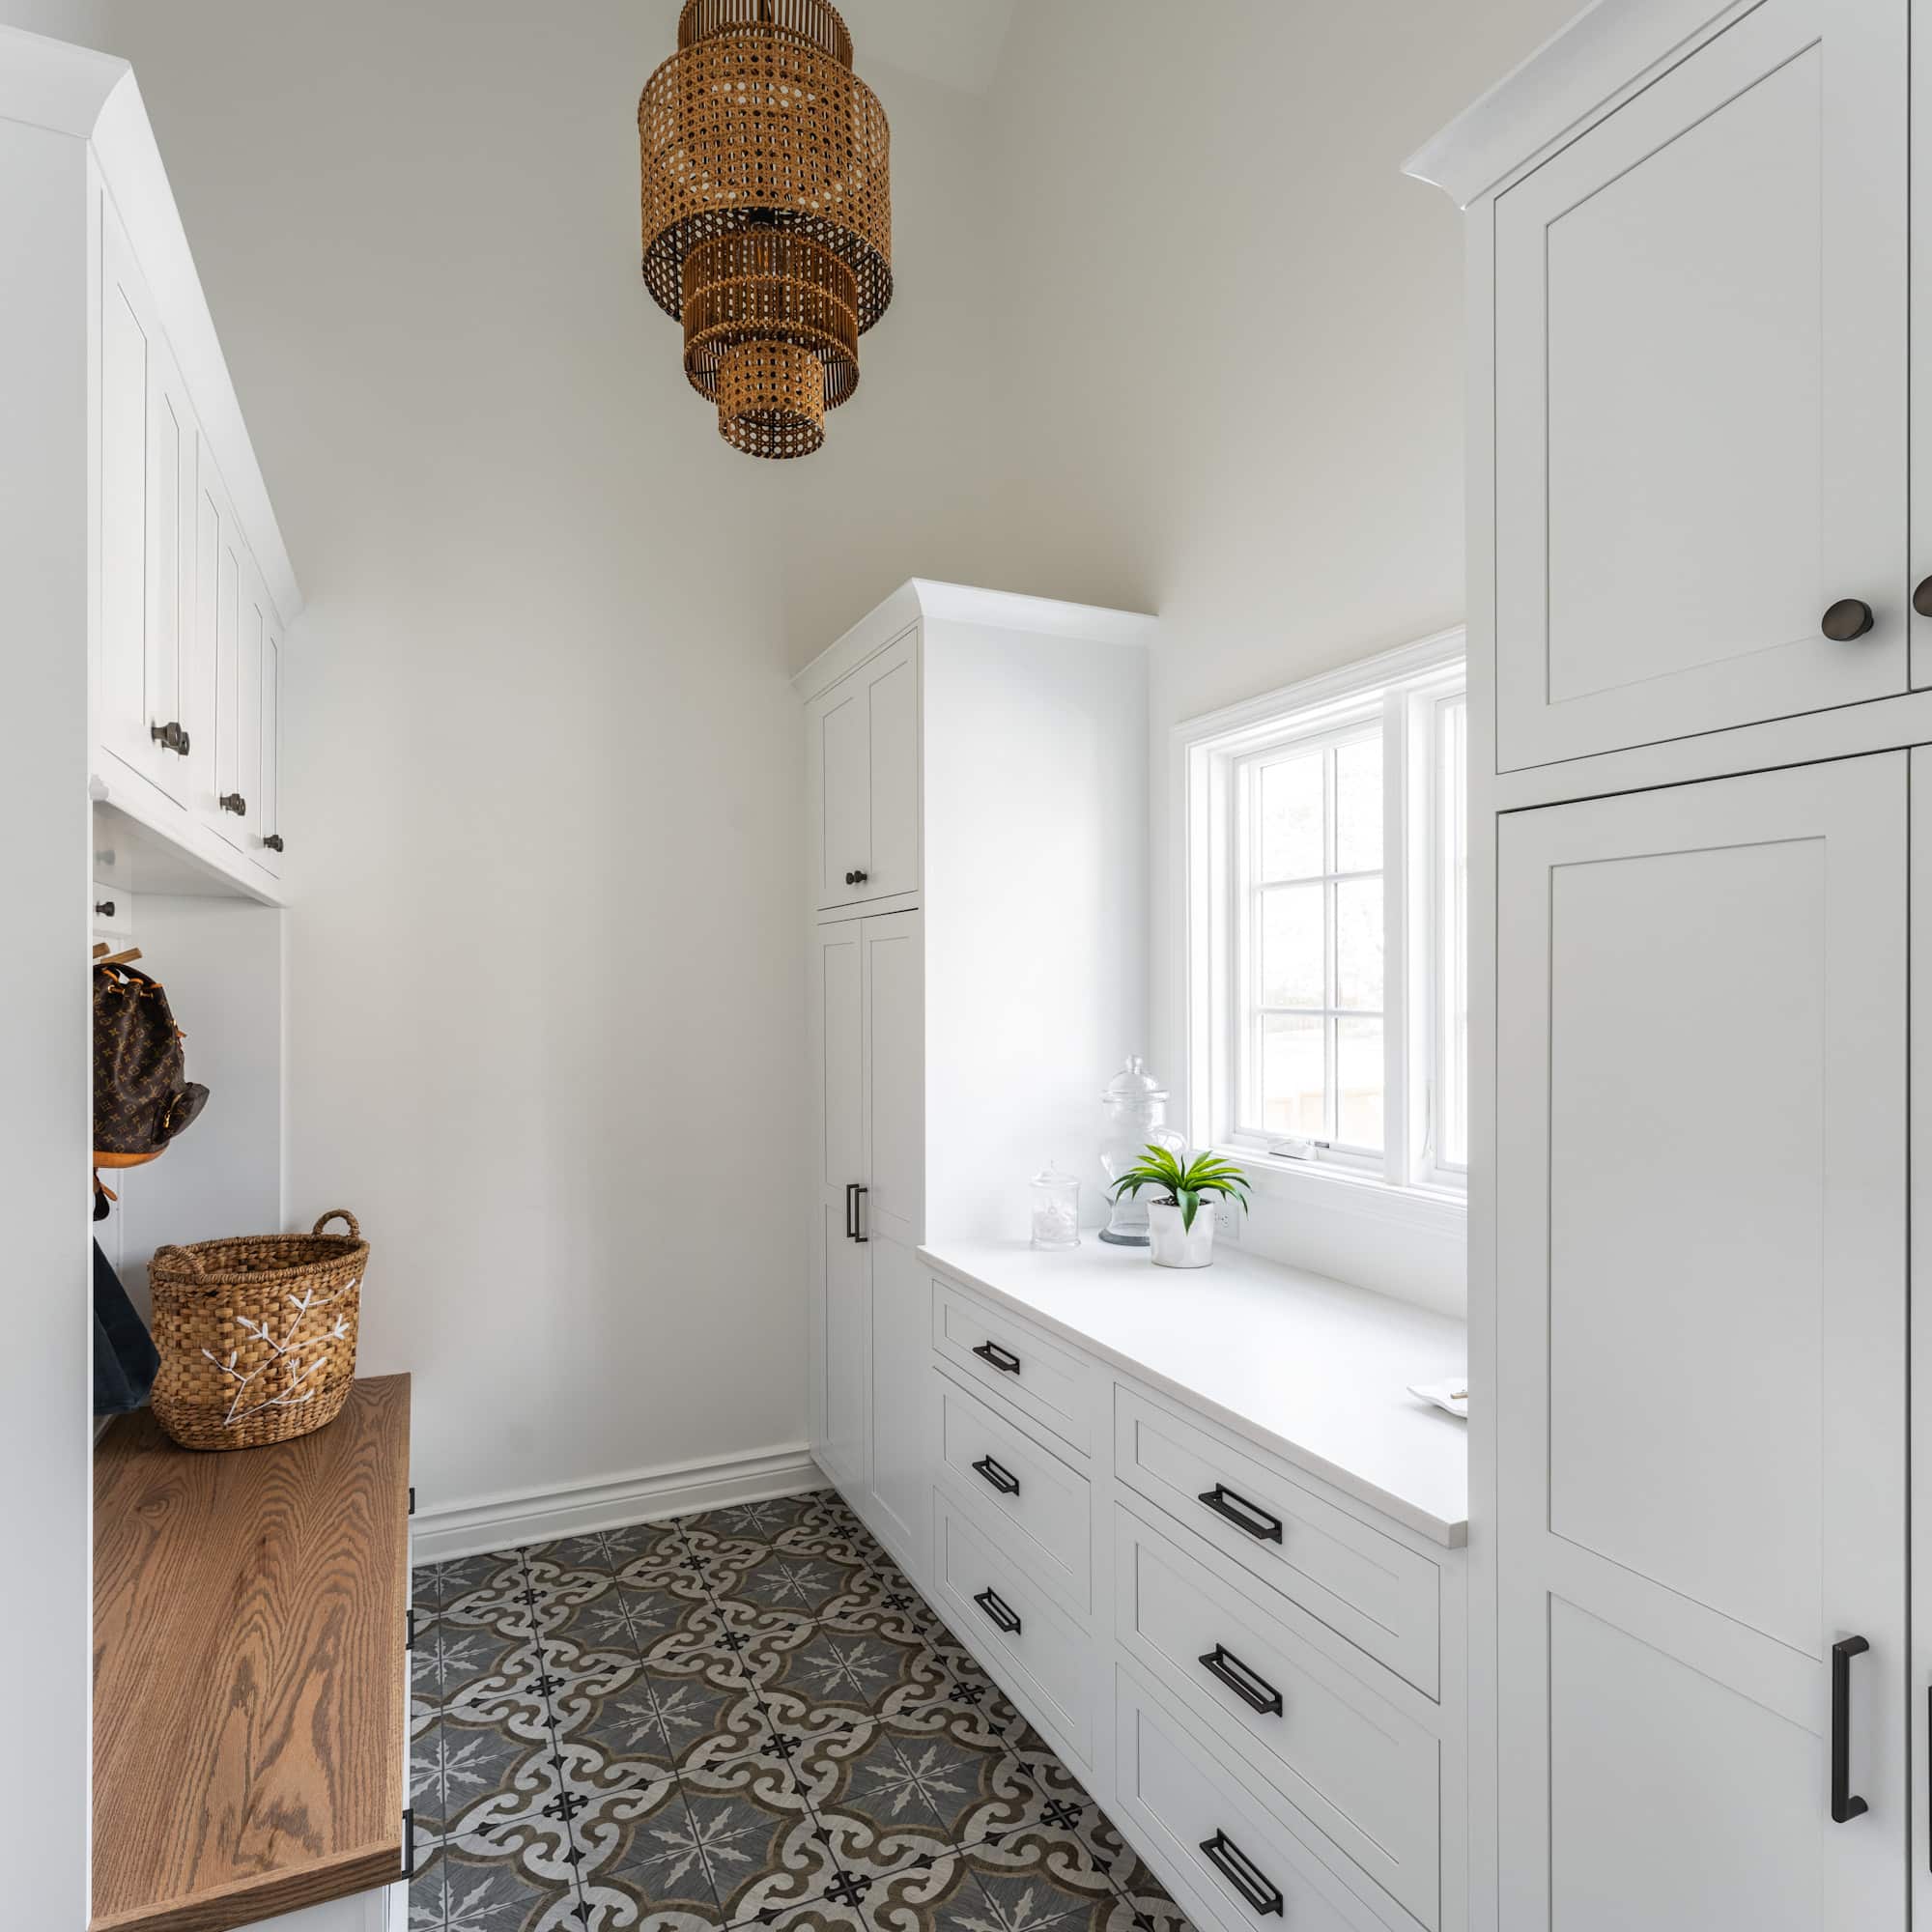 Mudroom addition with pattern tile floor